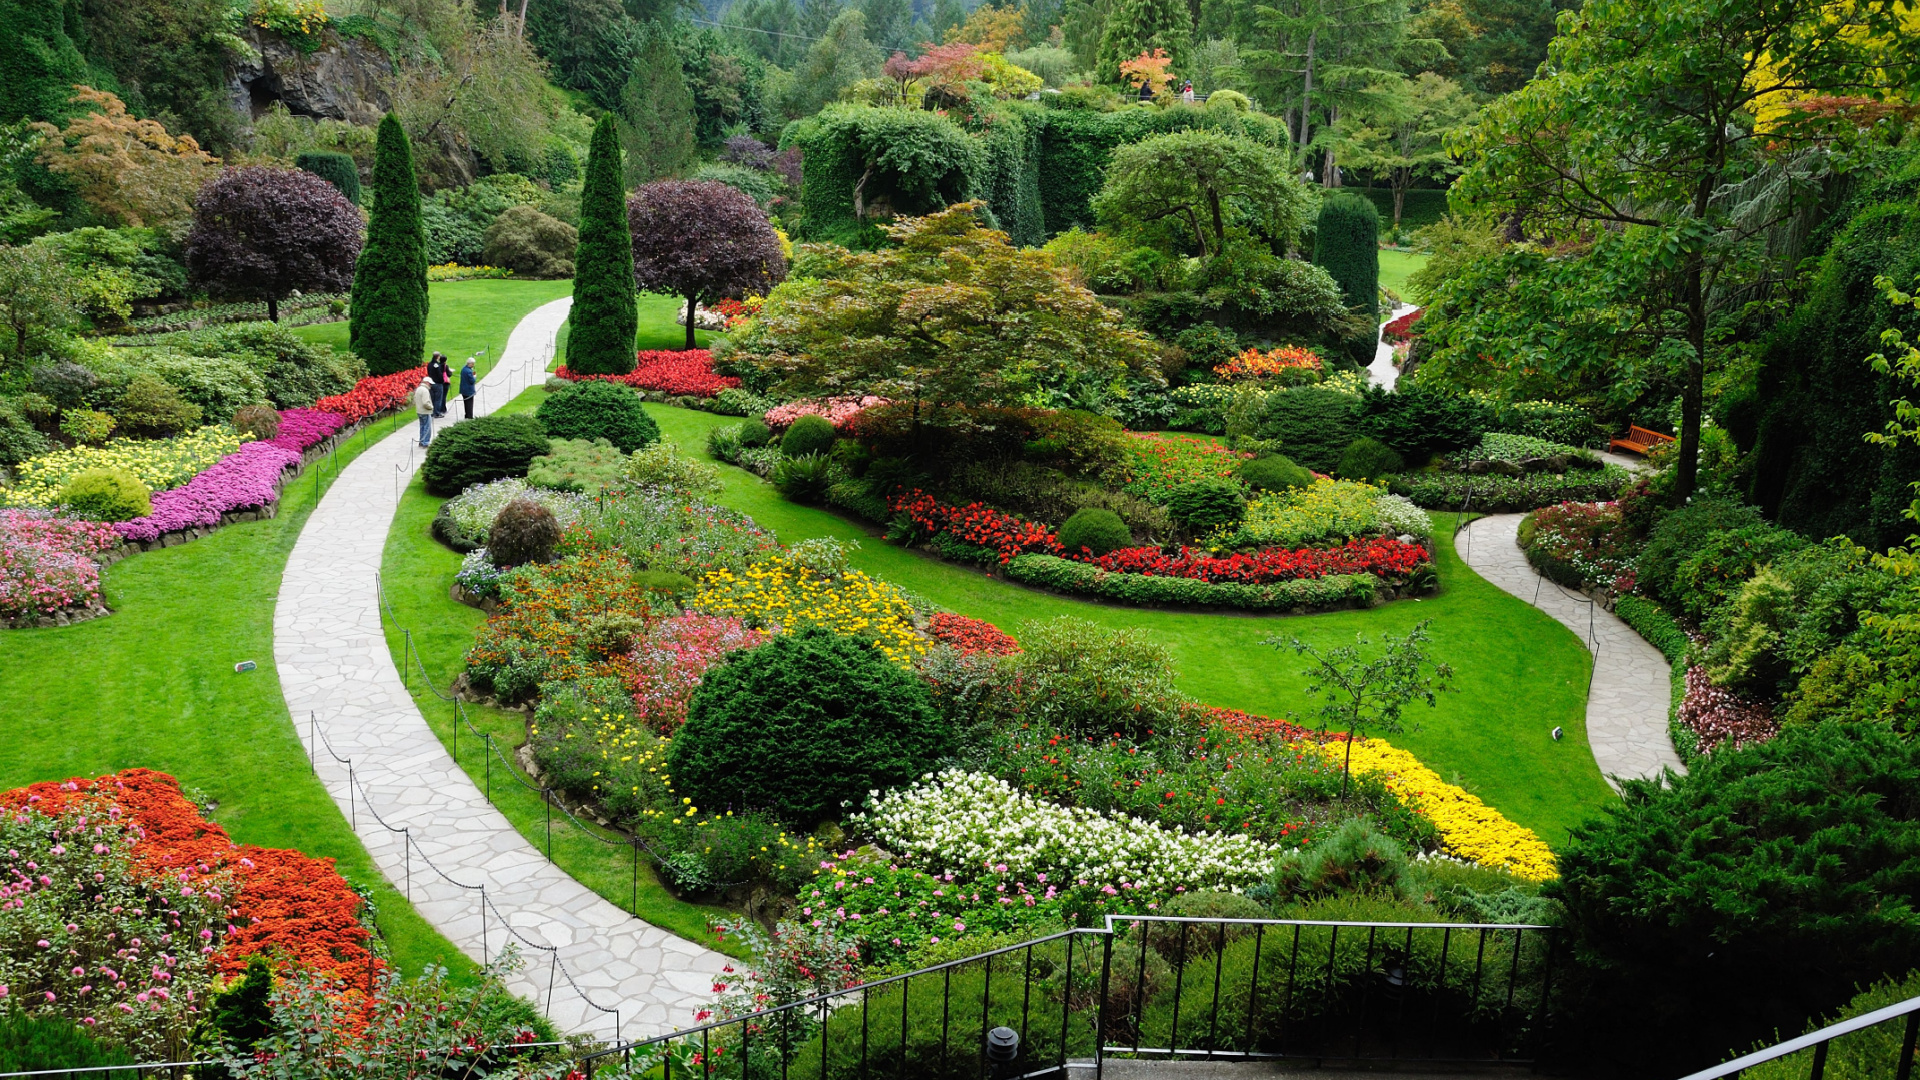 the Butchart Gardens in Victoria, Canada